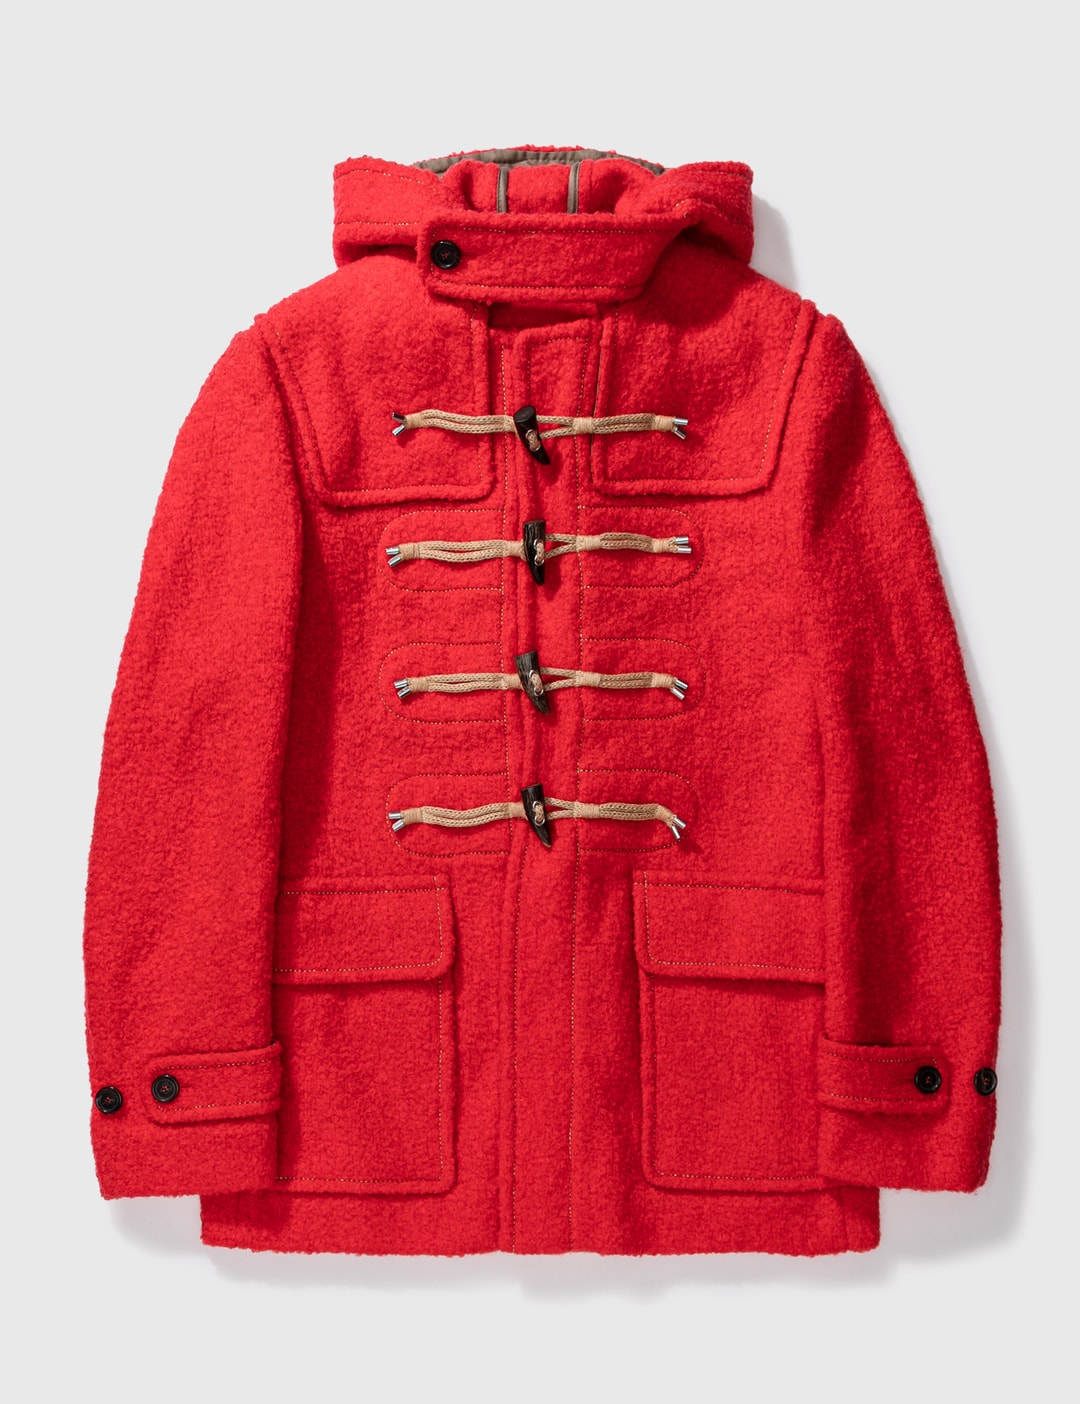 DSQUARED 2 WOOL DUFFLE COAT Placeholder Image